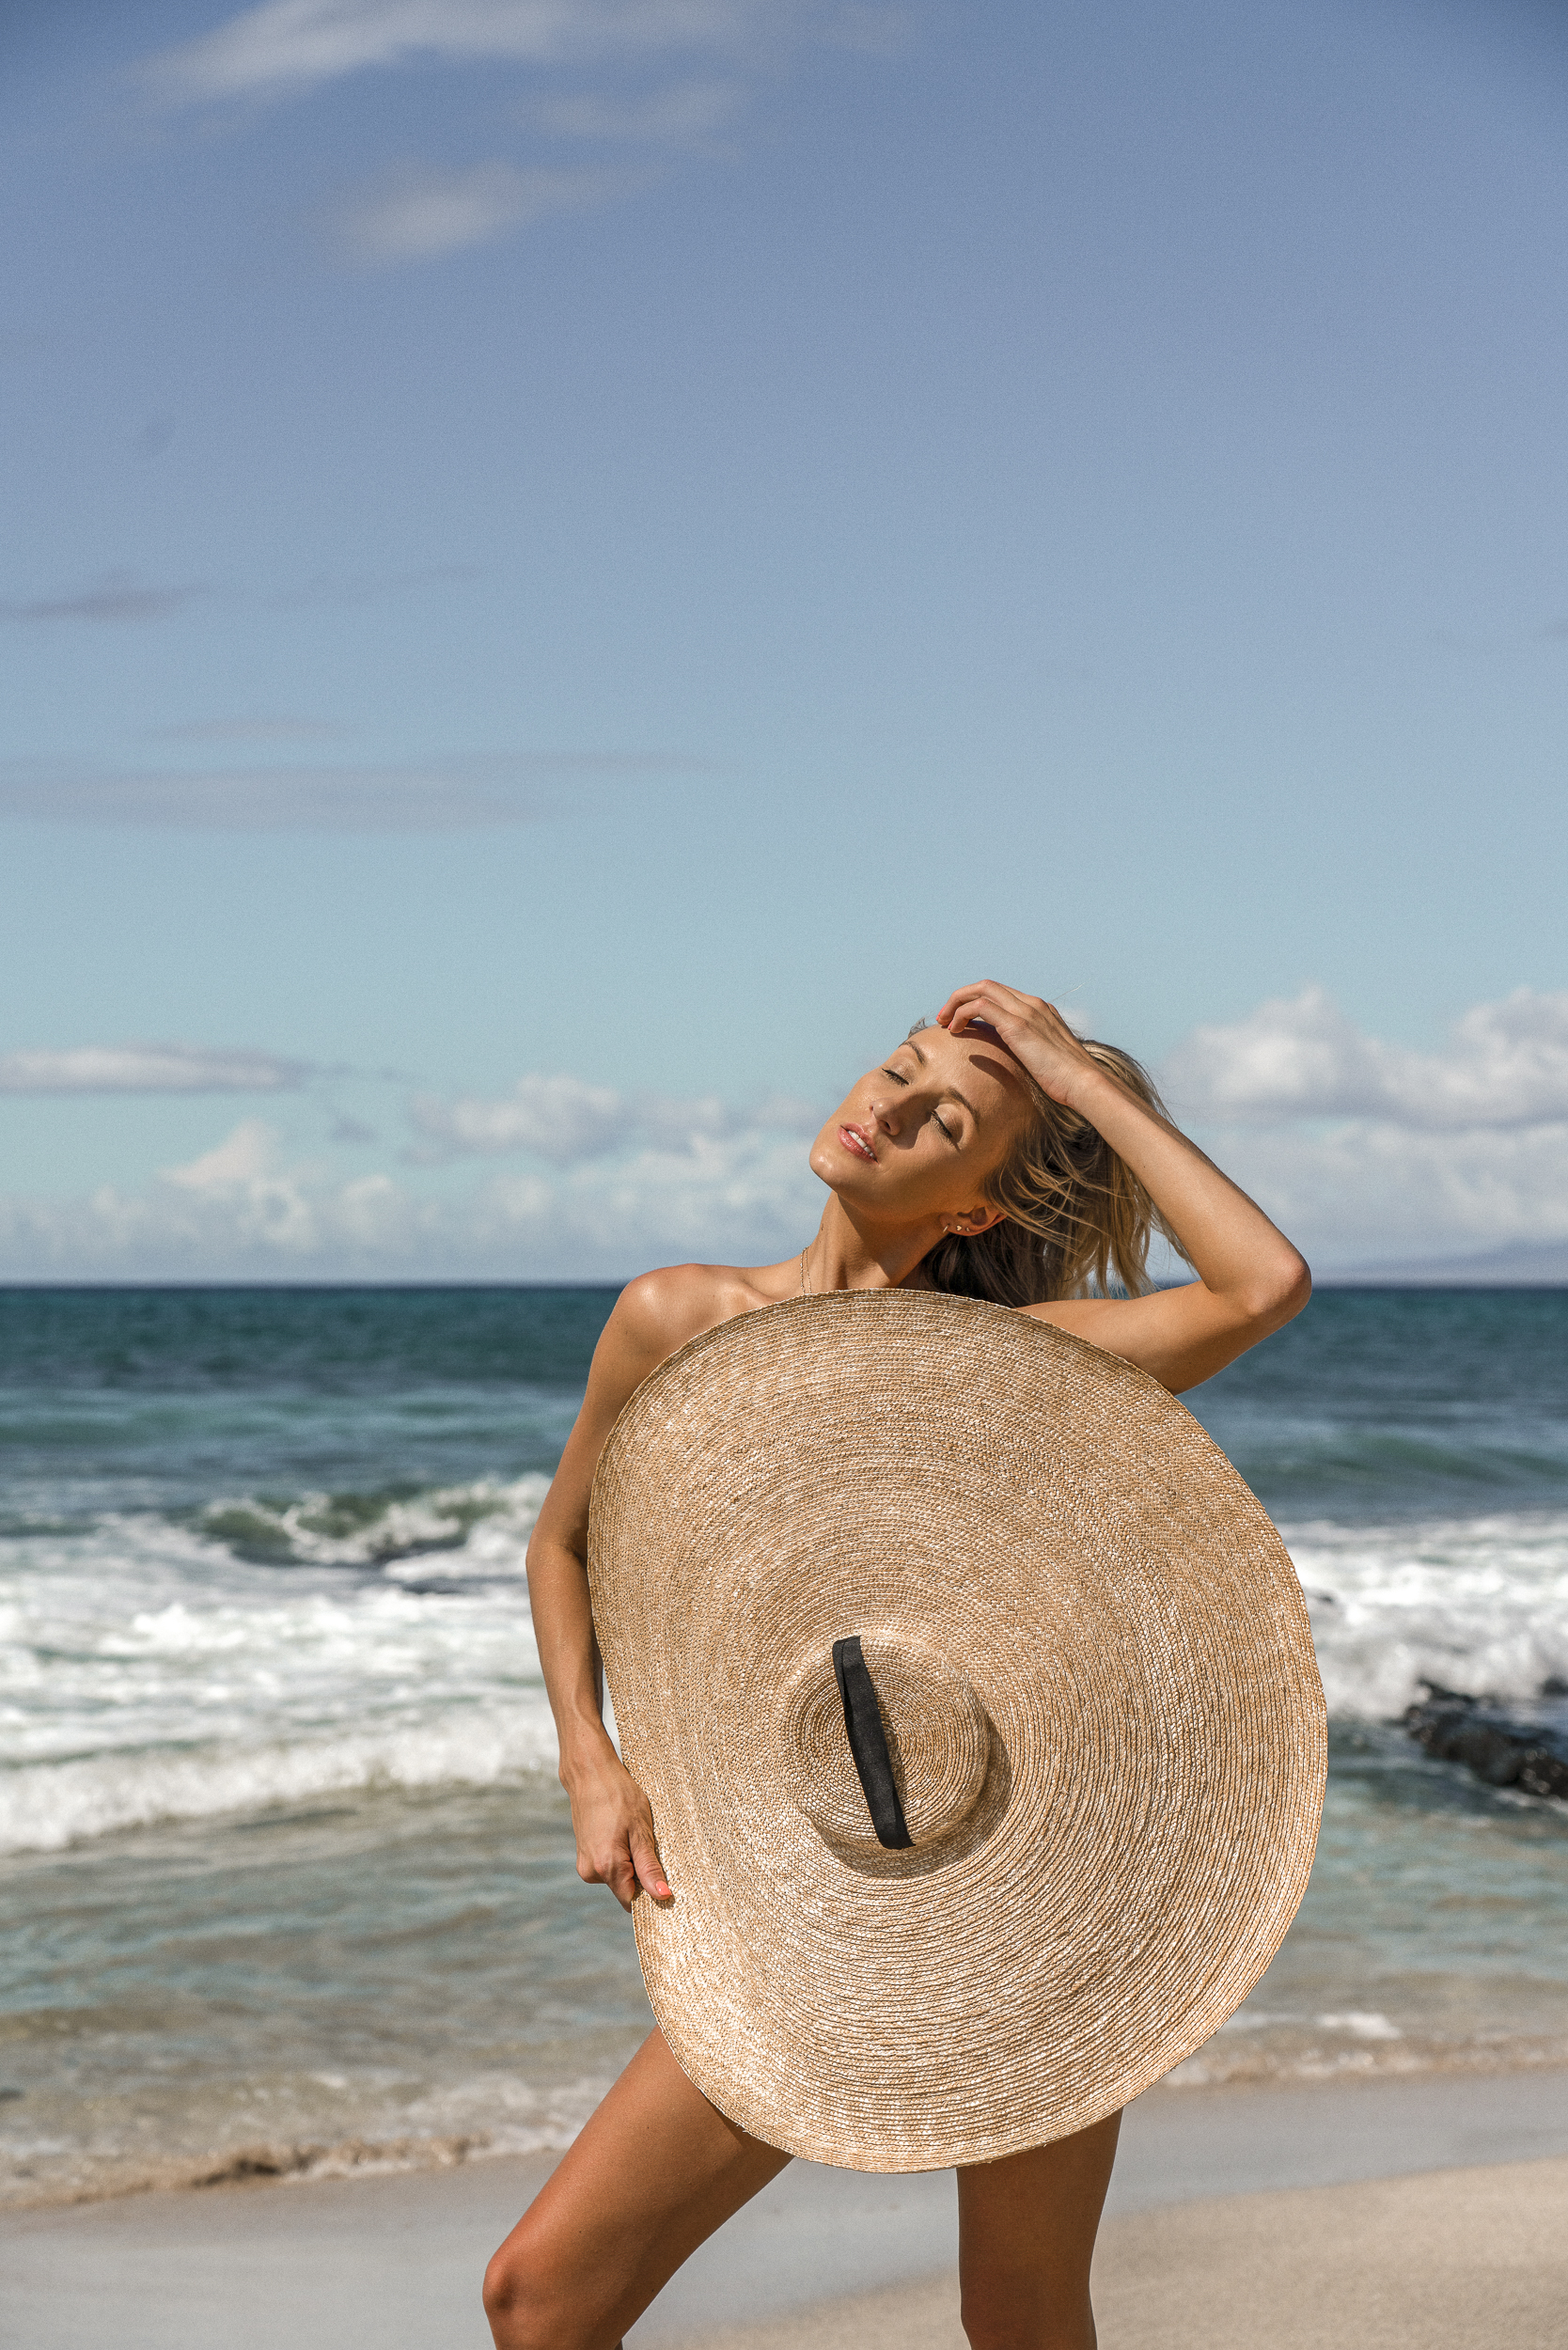 The Sun Hats You Need Right Now